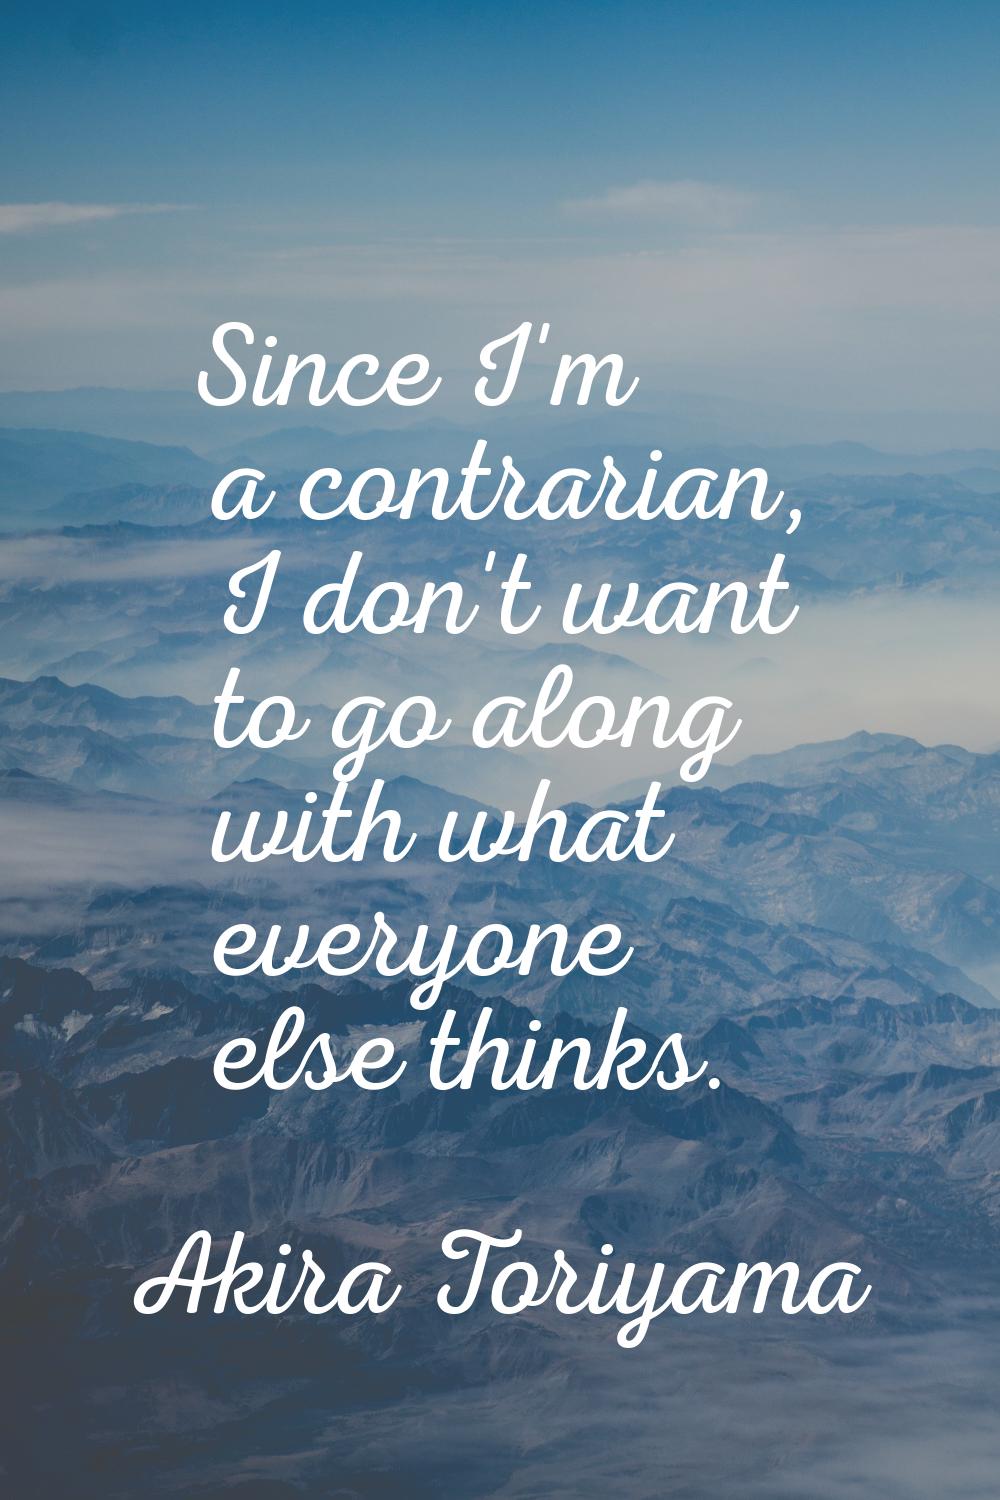 Since I'm a contrarian, I don't want to go along with what everyone else thinks.